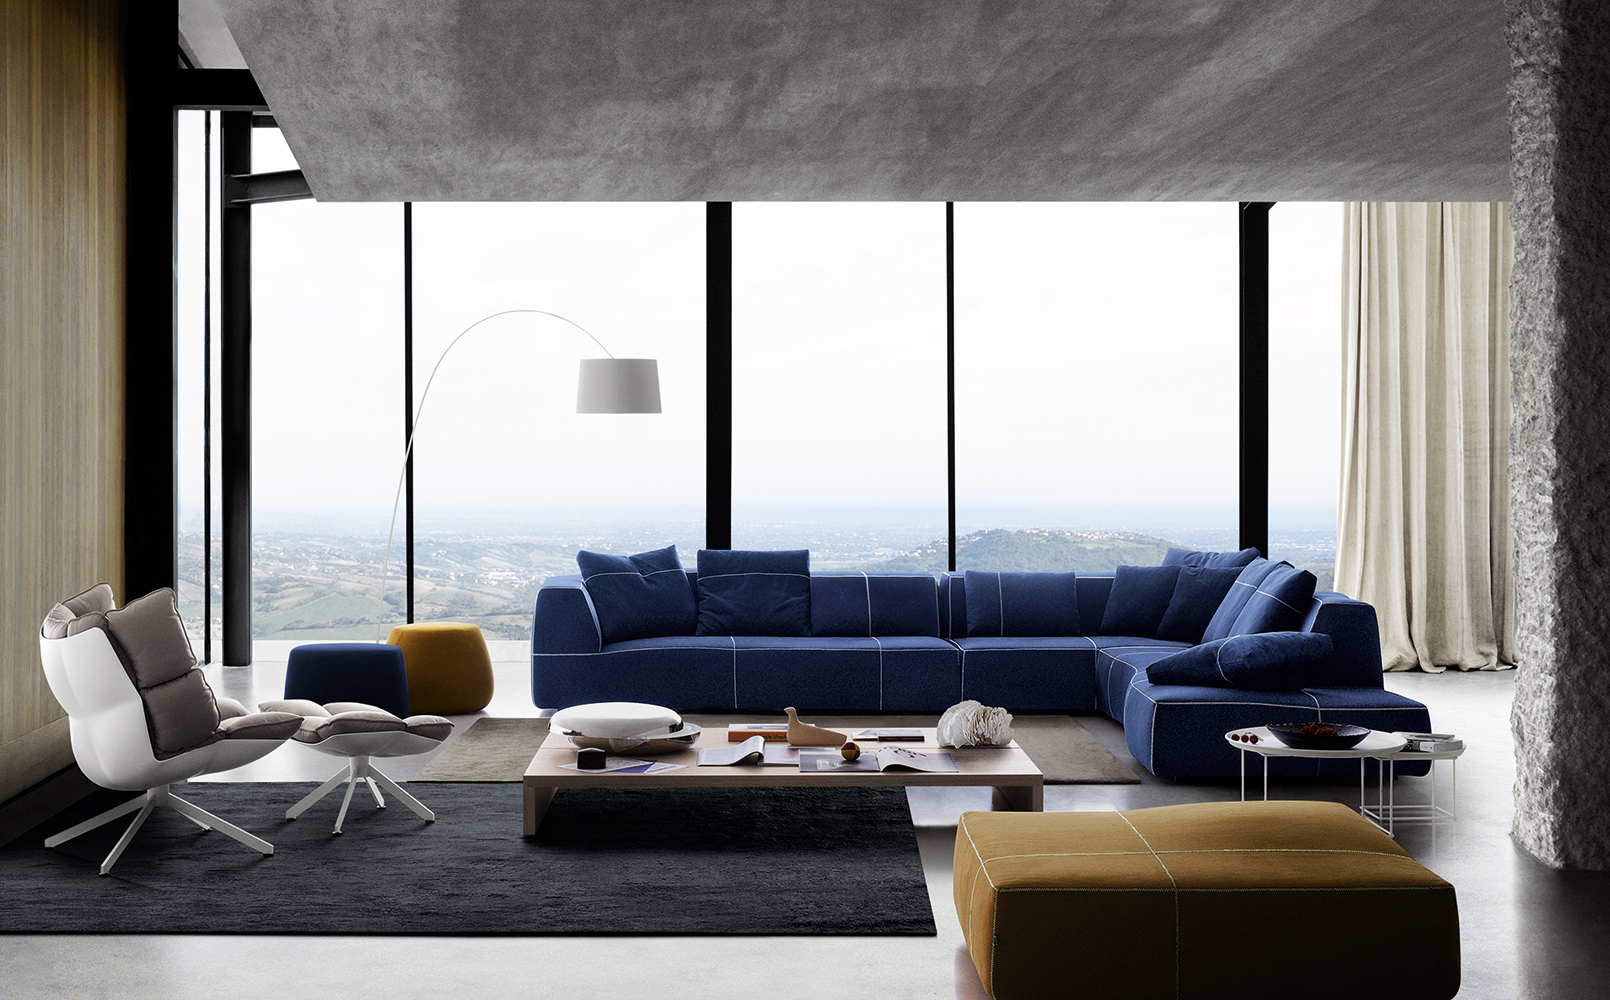  Building on the technological advances developed in the 60s, the Bend sofa by Patricia Urquiola involved complex 3D modelling to create the form which Urquiola describes as 